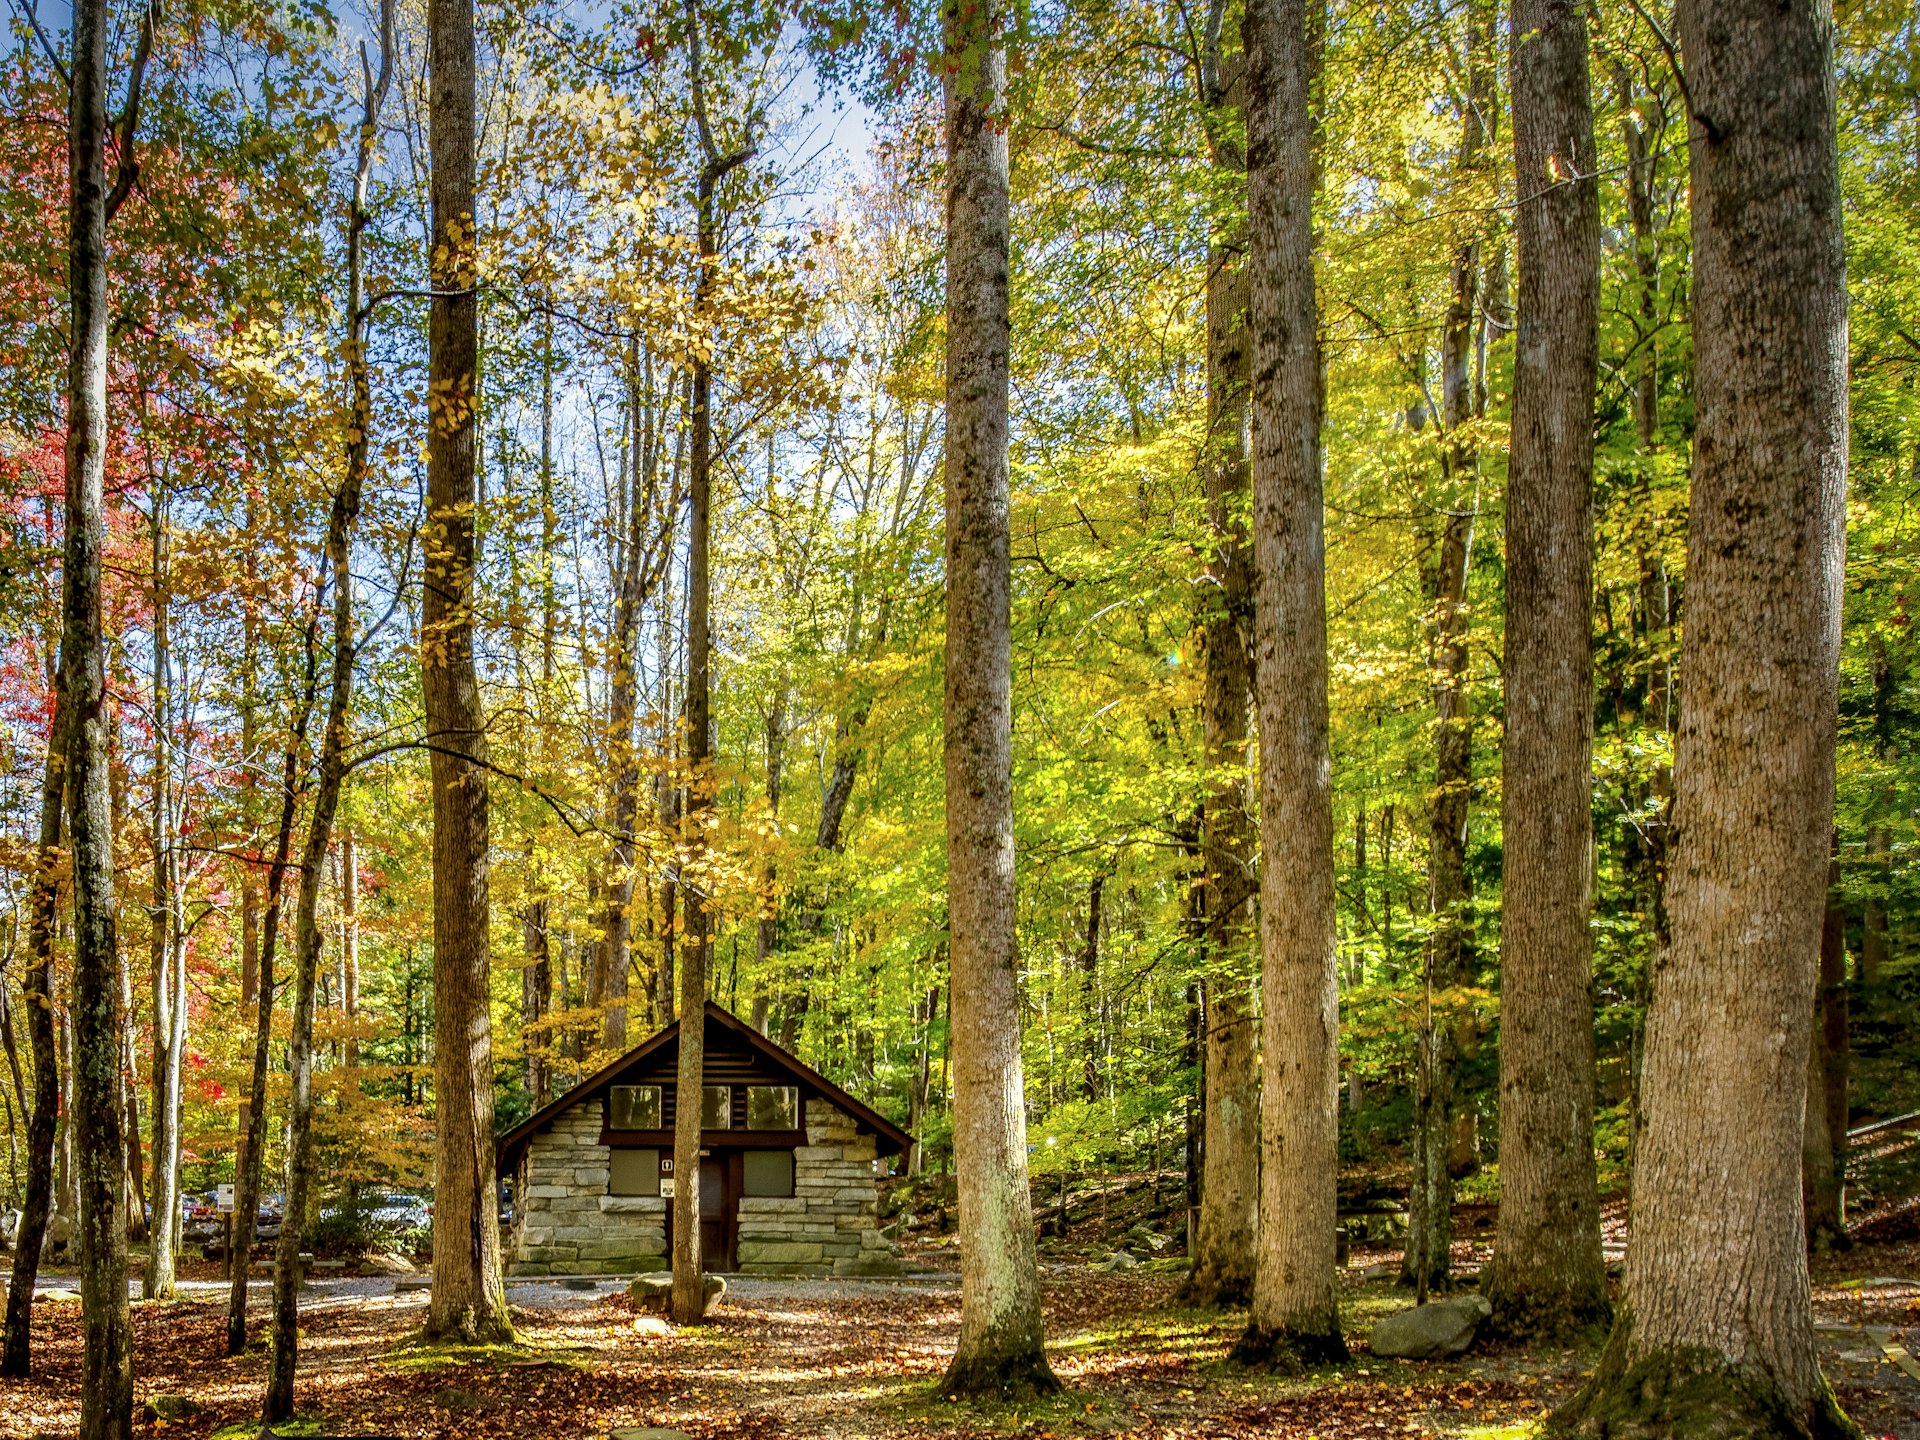 Picnic area in forest of the Great Smokey Mountains National Park,USA